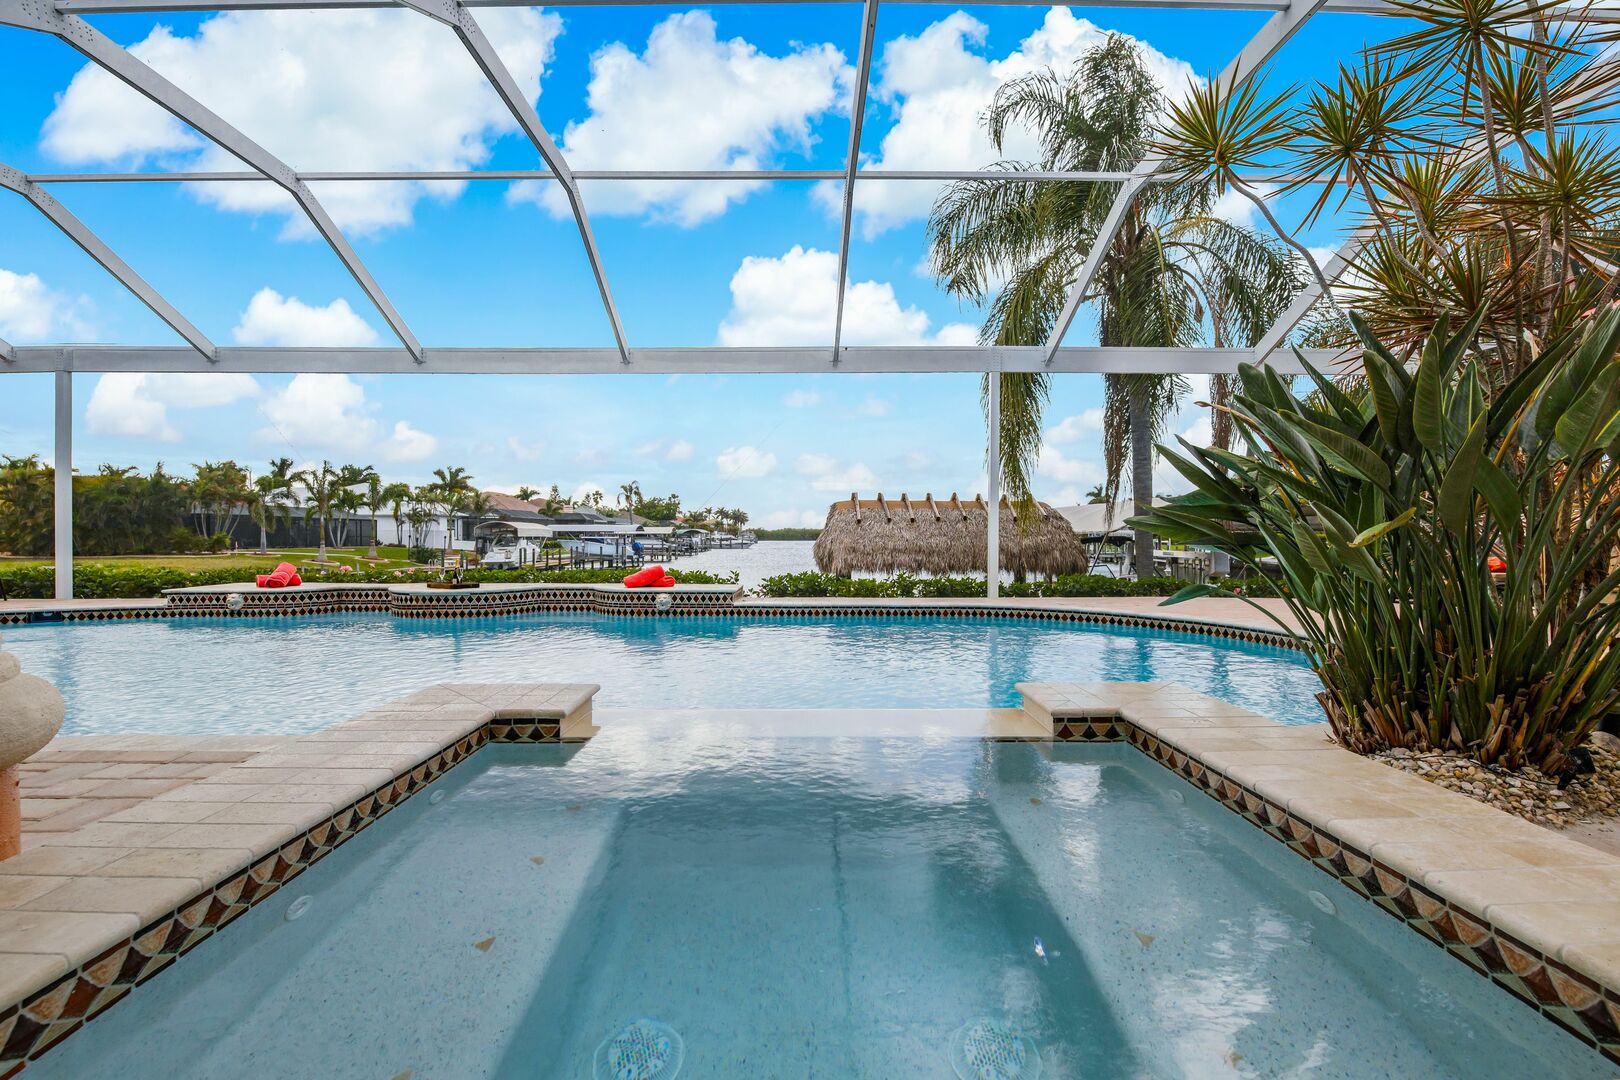 Heated pool vacation rental in Cape Coral